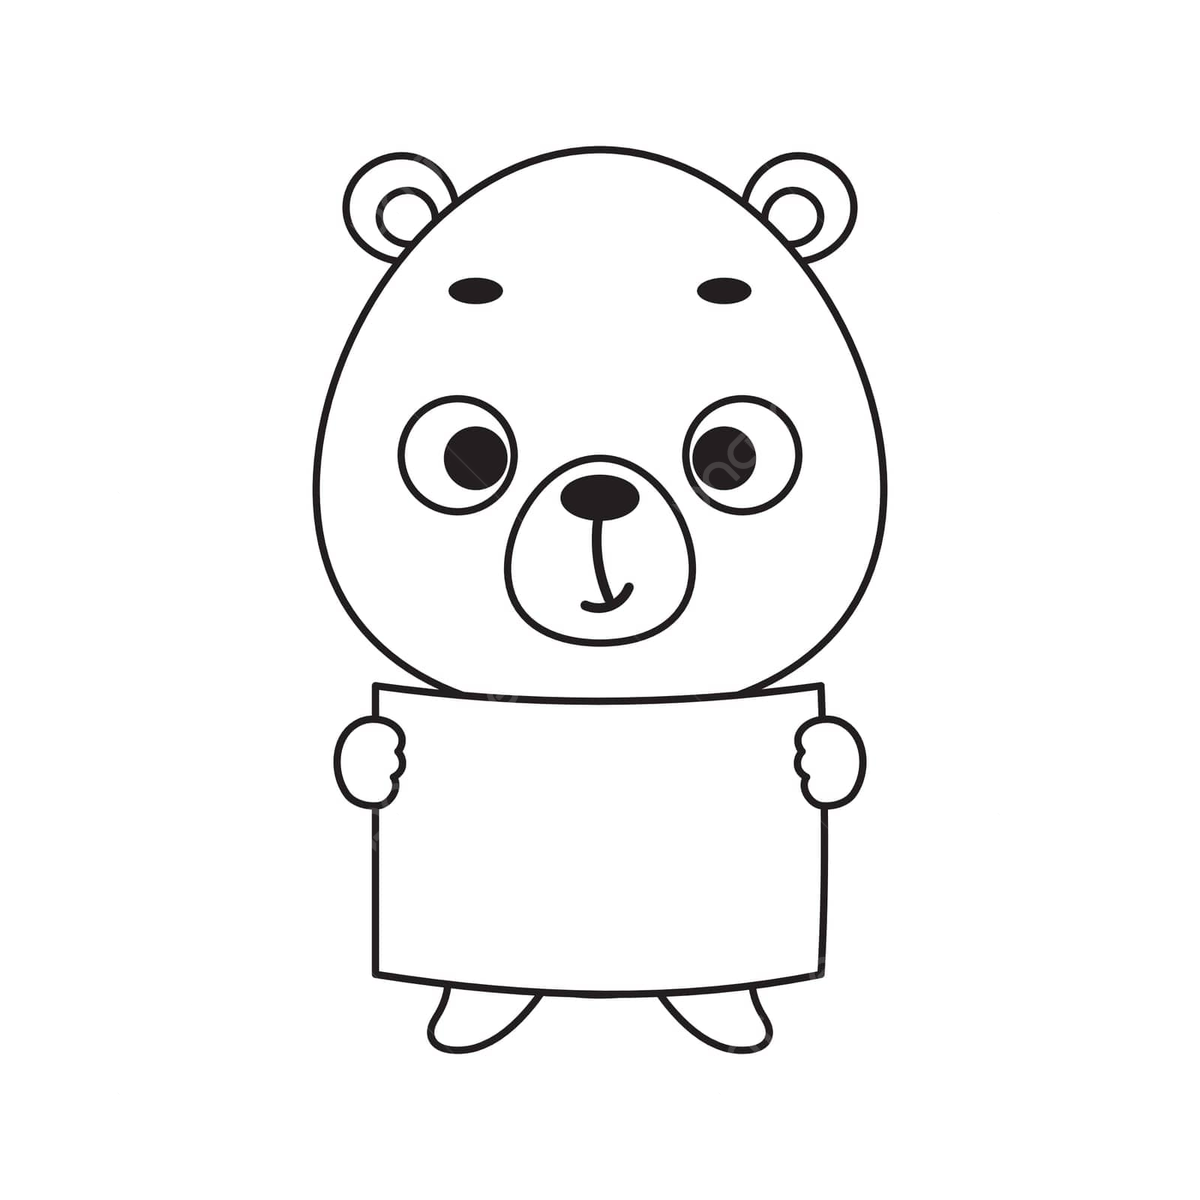 Cute bear coloring page for kids with educational value vector cat drawing bear drawing ring drawing png and vector with transparent background for free download